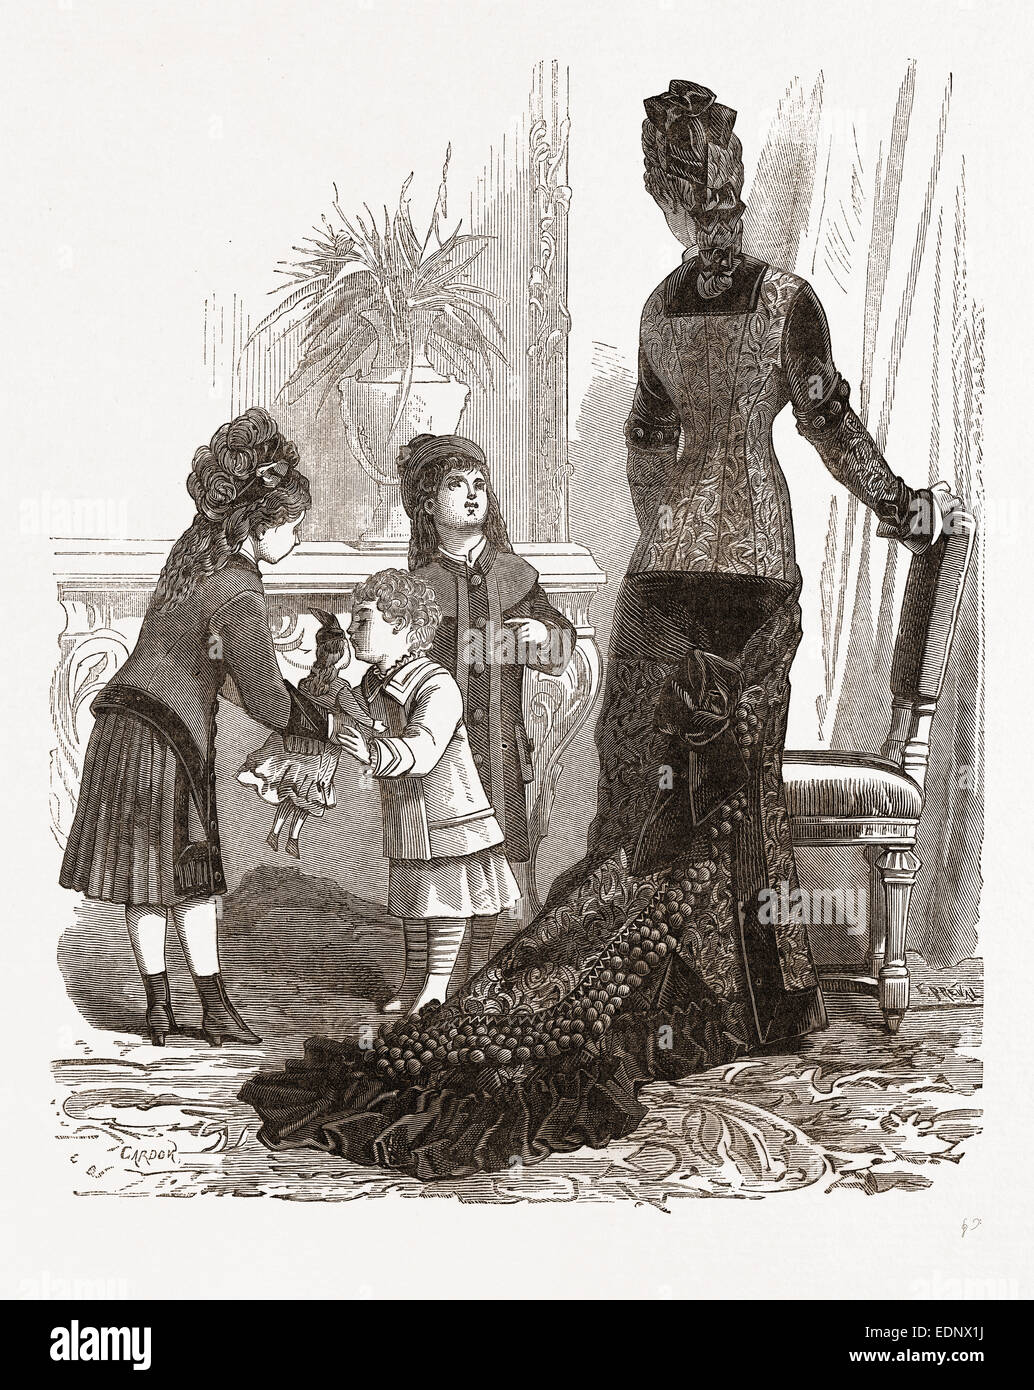 COSTUMES FOR A YOUNG MOTHER AND CHILDREN, 19th CENTURY FASHION Stock Photo